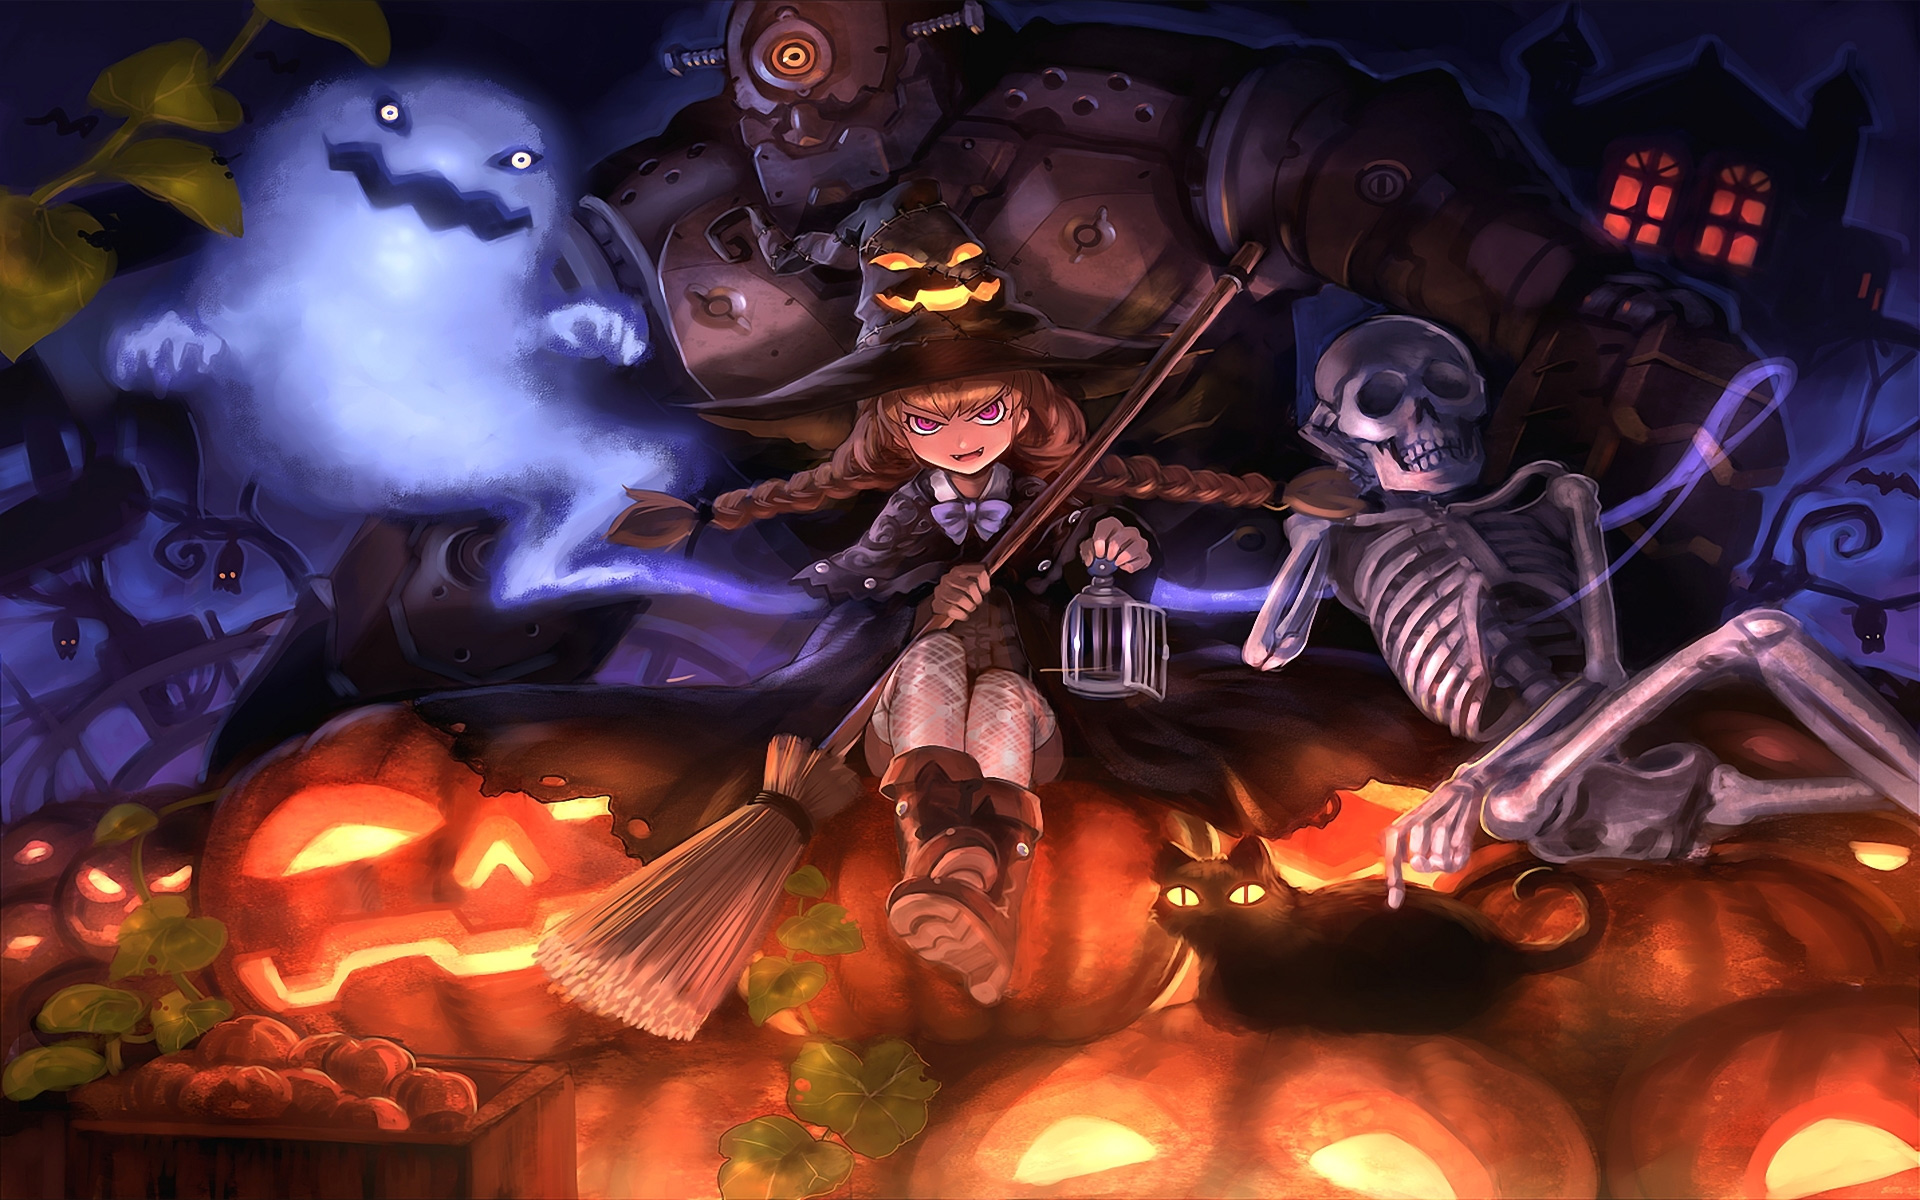  ittle Halloween Witch computer desktop wallpapers pictures images